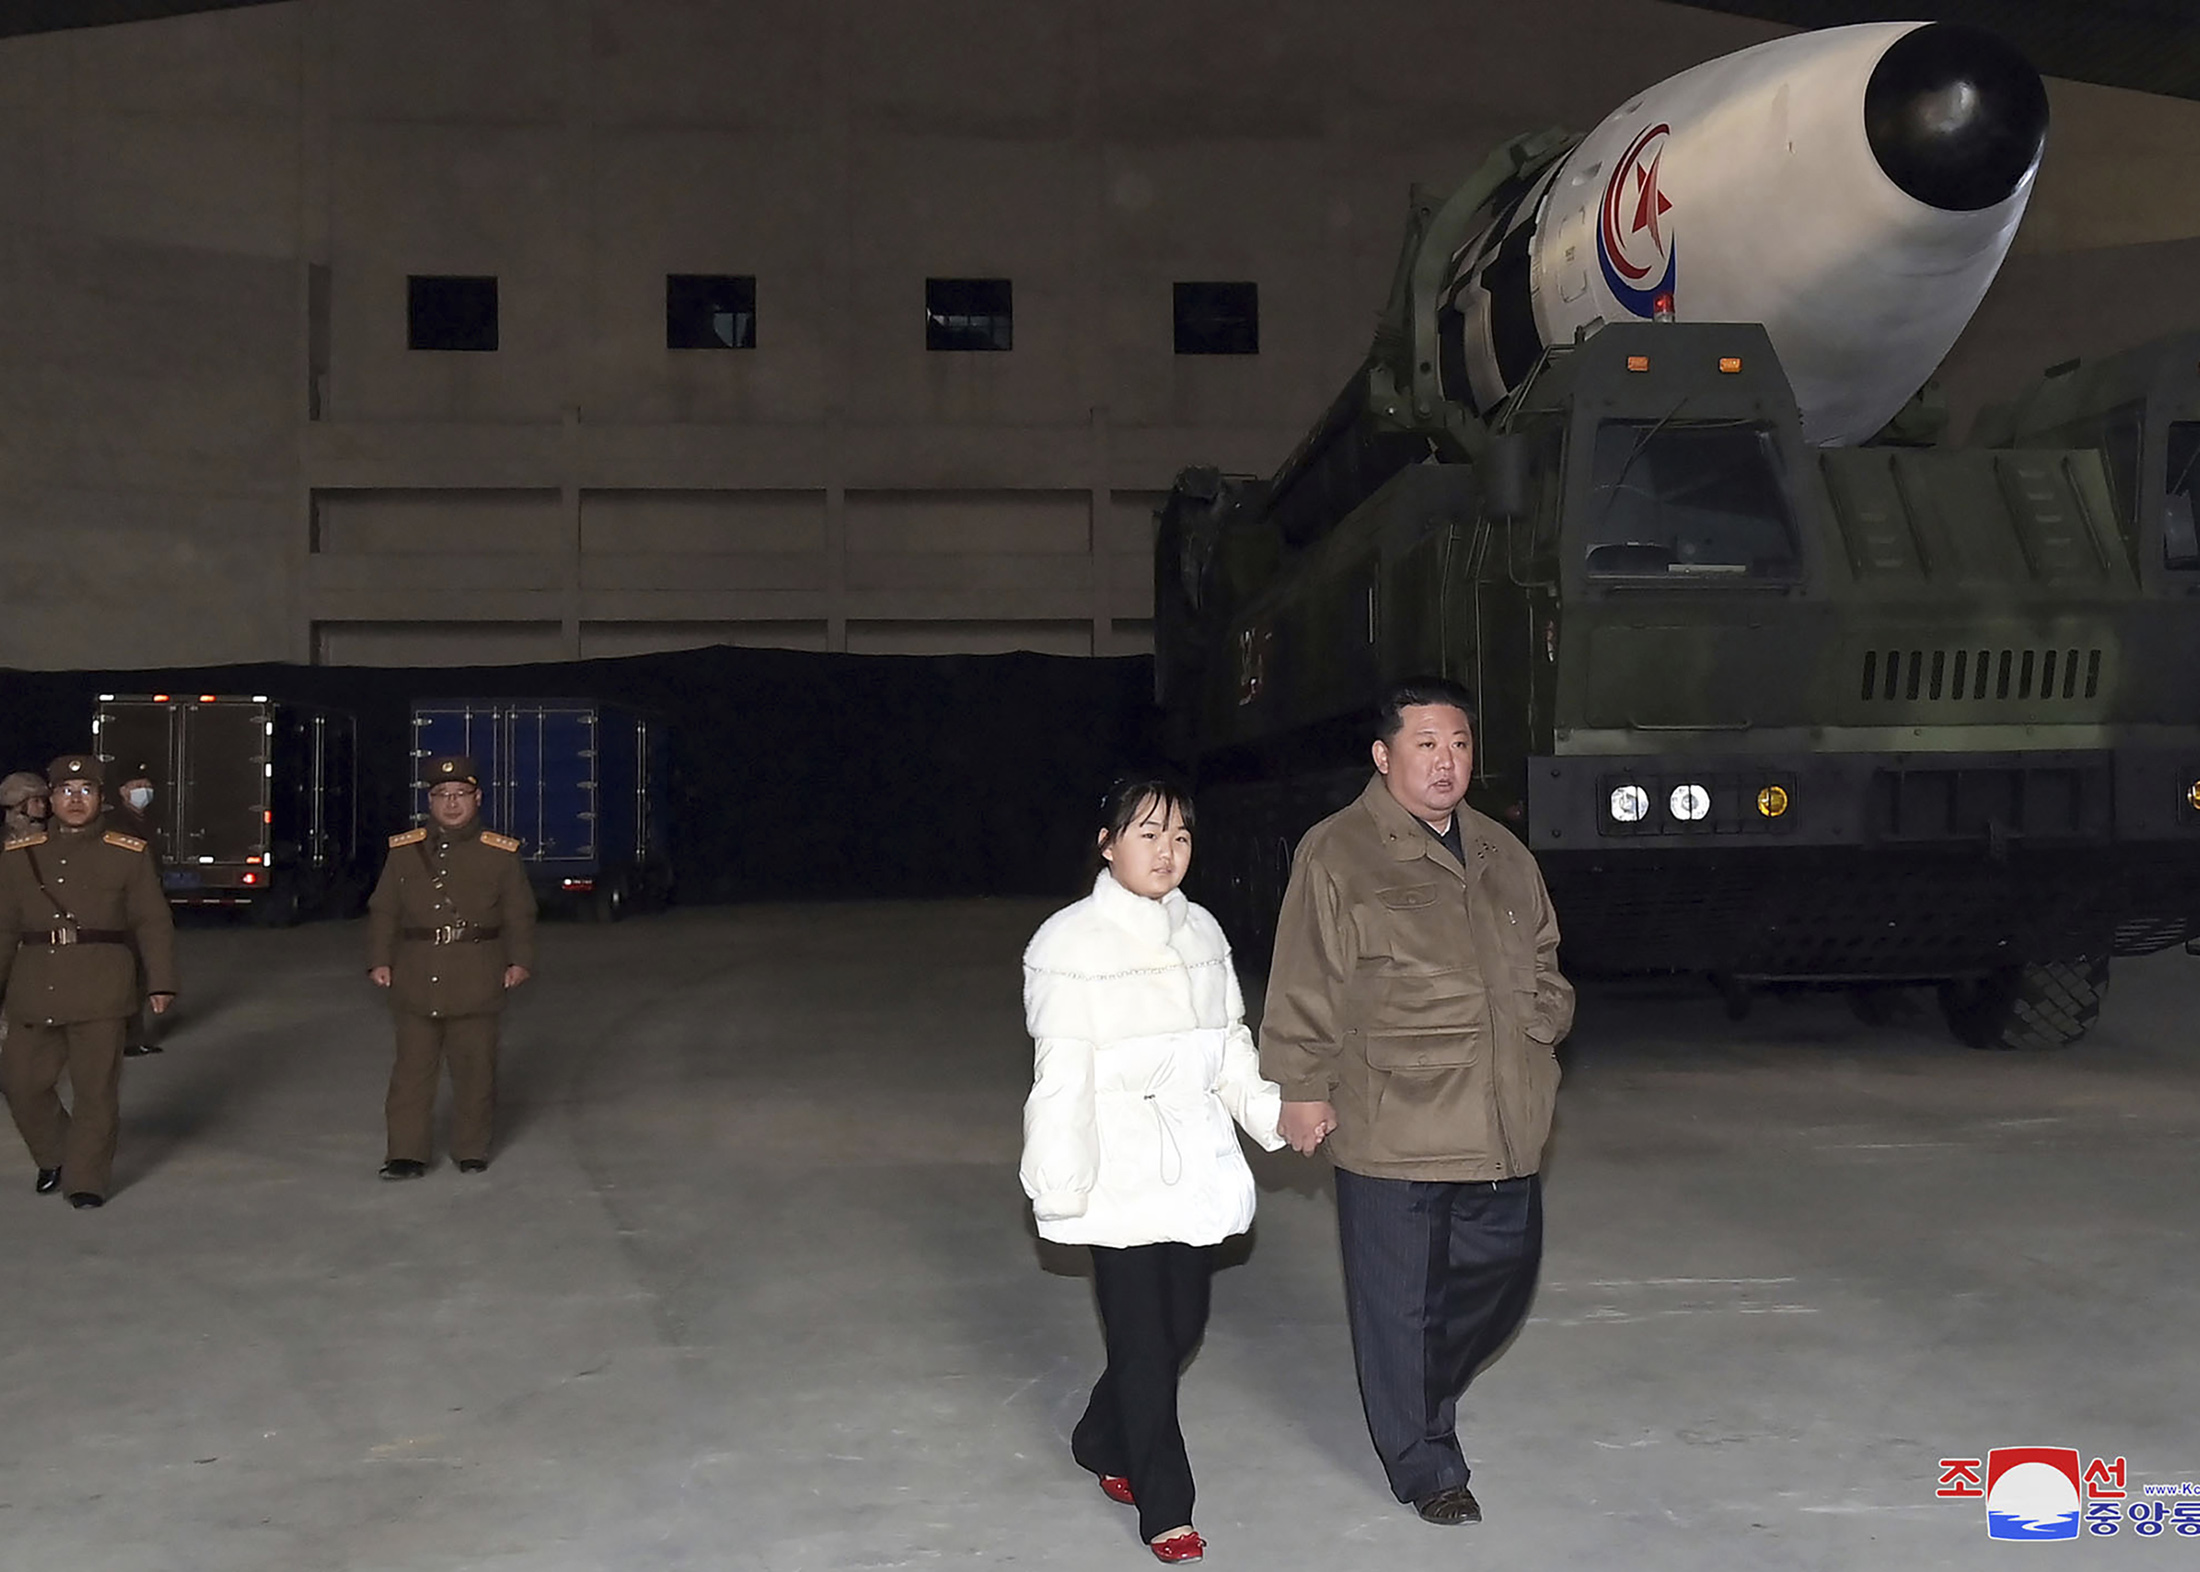 Kim Jong Un, right, and his daughter inspects a missile at Pyongyang International Airport in Pyongyang, North Korea, on Nov. 18.